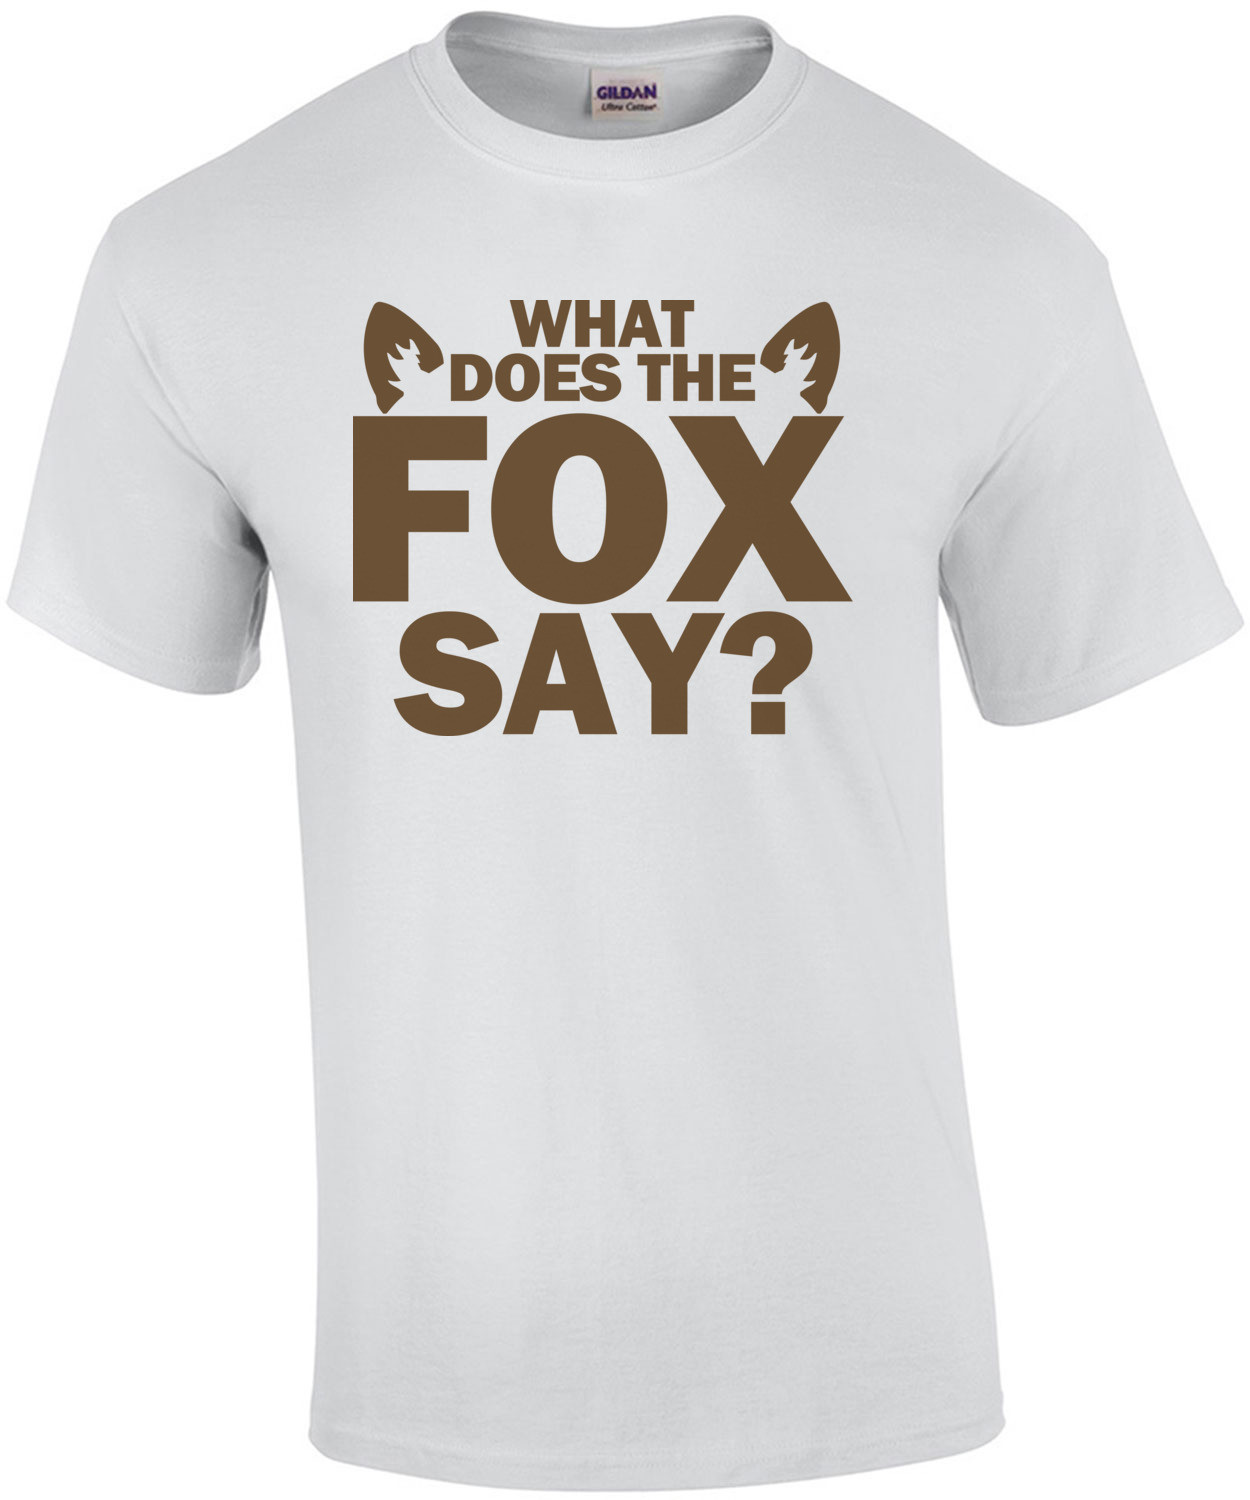 What Does the Fox Say Funny Shirt